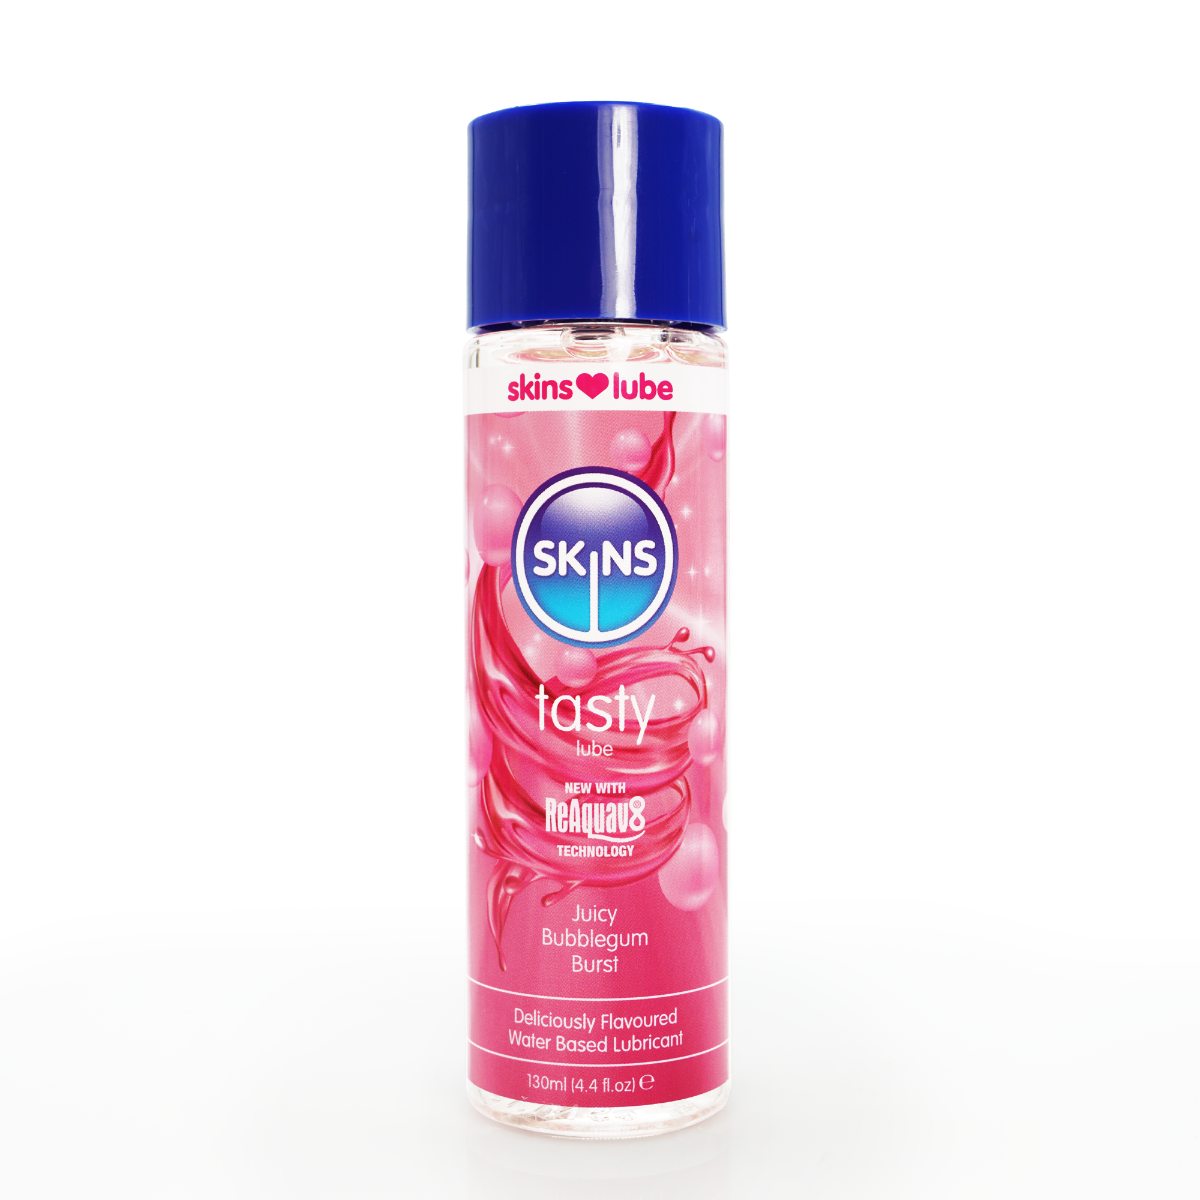 Skins - Flavoured Lubricant (130ml)